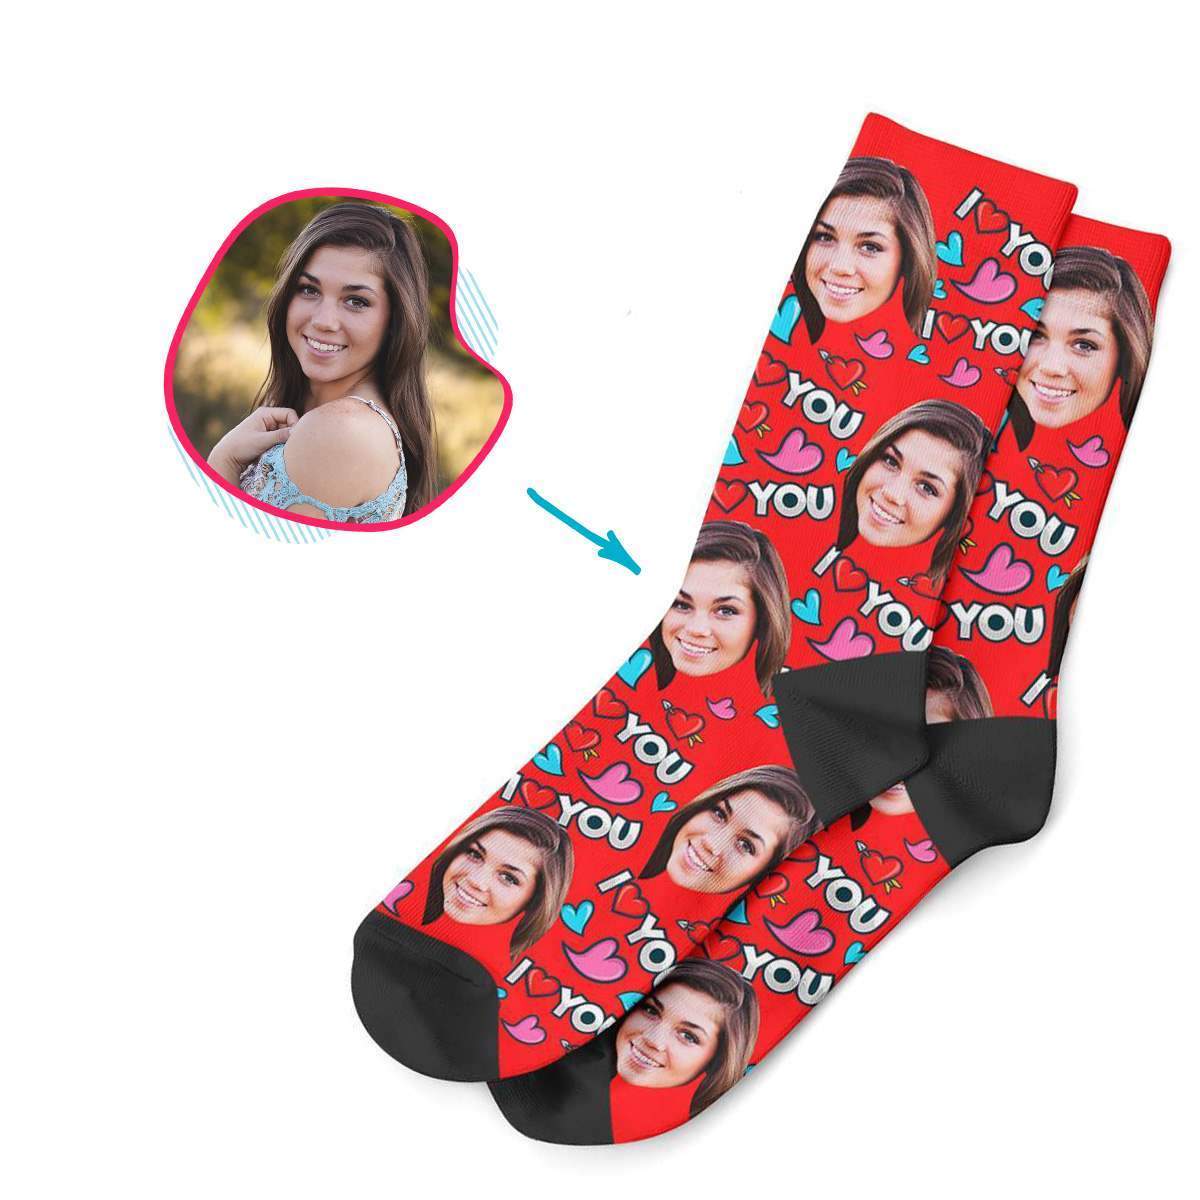 red Love You socks personalized with photo of face printed on them